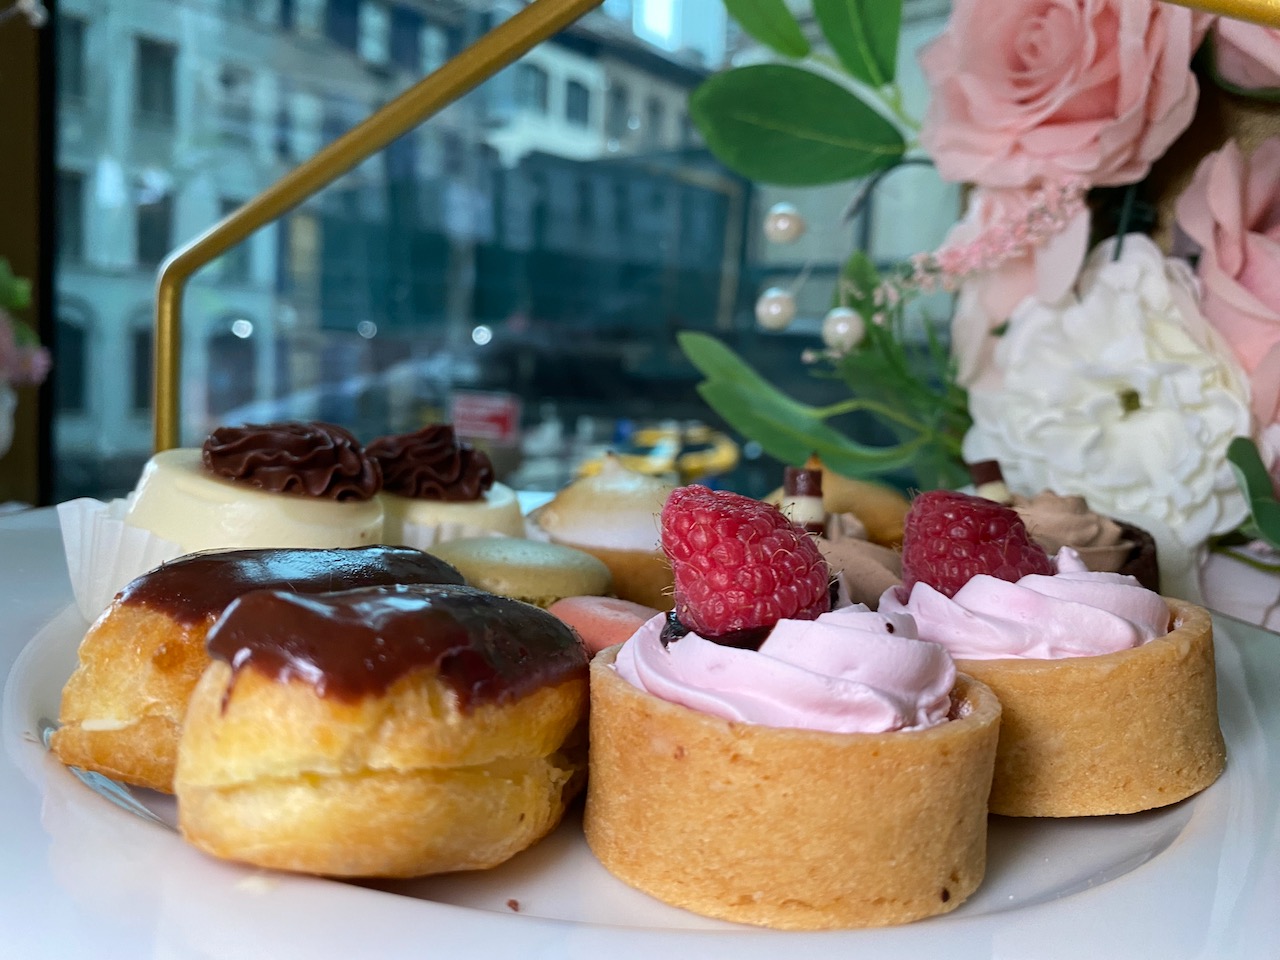 Tea Around Town Is One Way to Spend Afternoon Tea in NYC